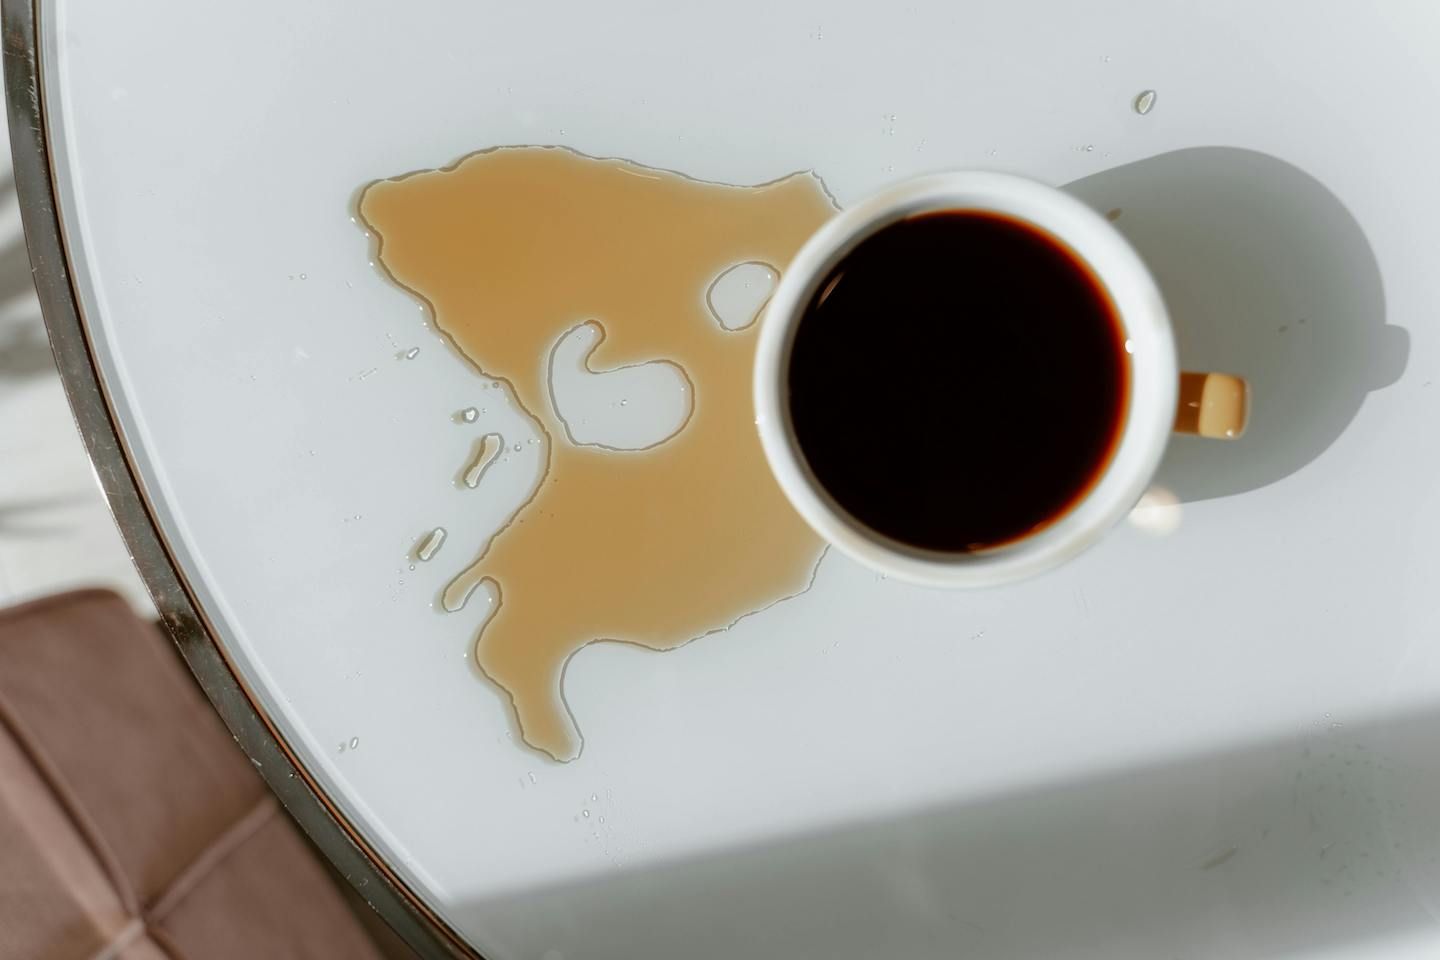 Coffee cup sitting on a table with coffee spilt on the table